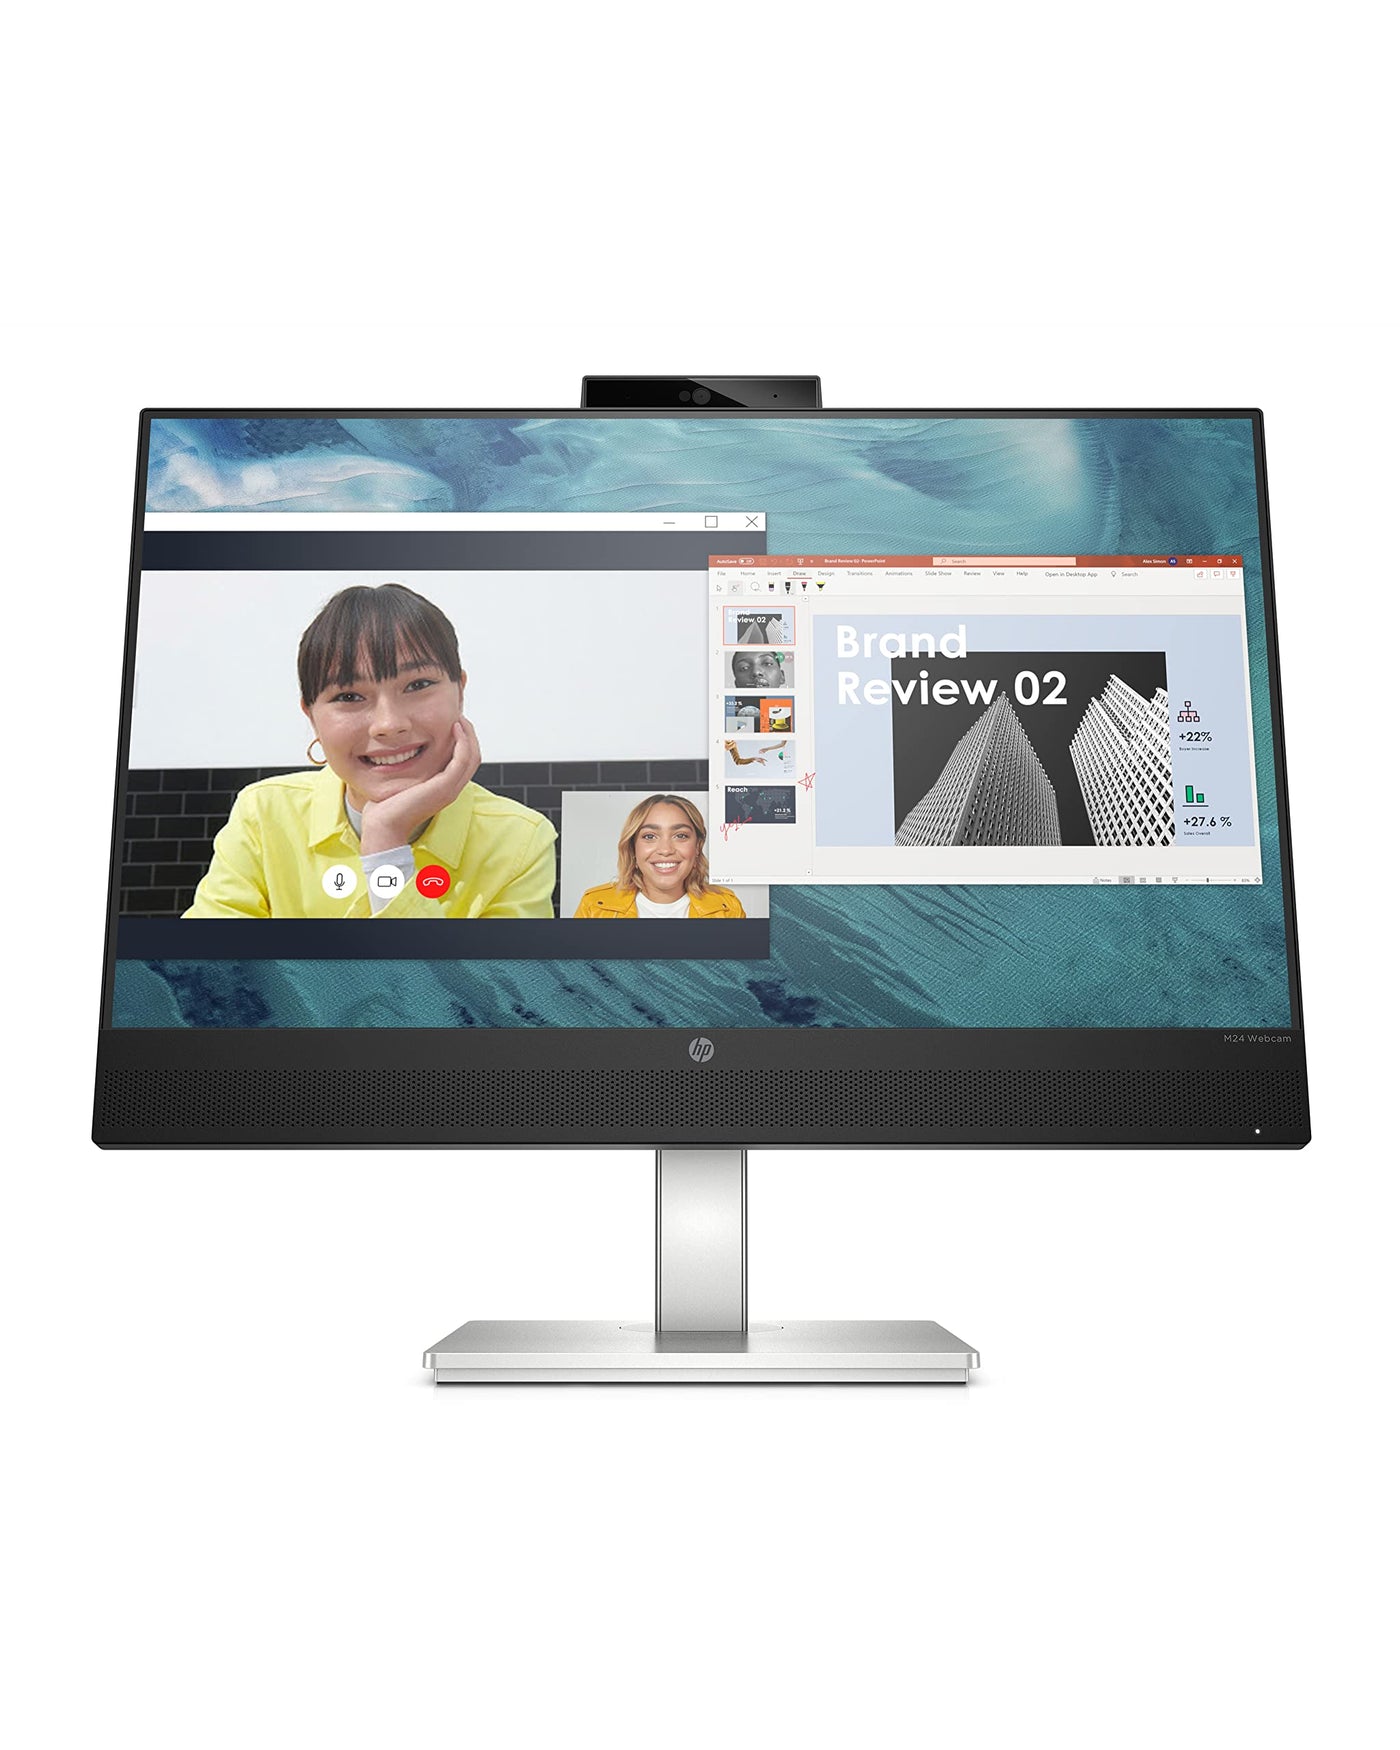 HP M24 Webcam-Monitor, 1080p IPS Display, 75Hz Refresh Rate, 23.8' Computer-Screen, 5MP-Camera with 2 Mics & Speakers, Always-On Blue Light Filter, Adjustable Stand, USB-C & HDMI, VESA-Mounting (2022)